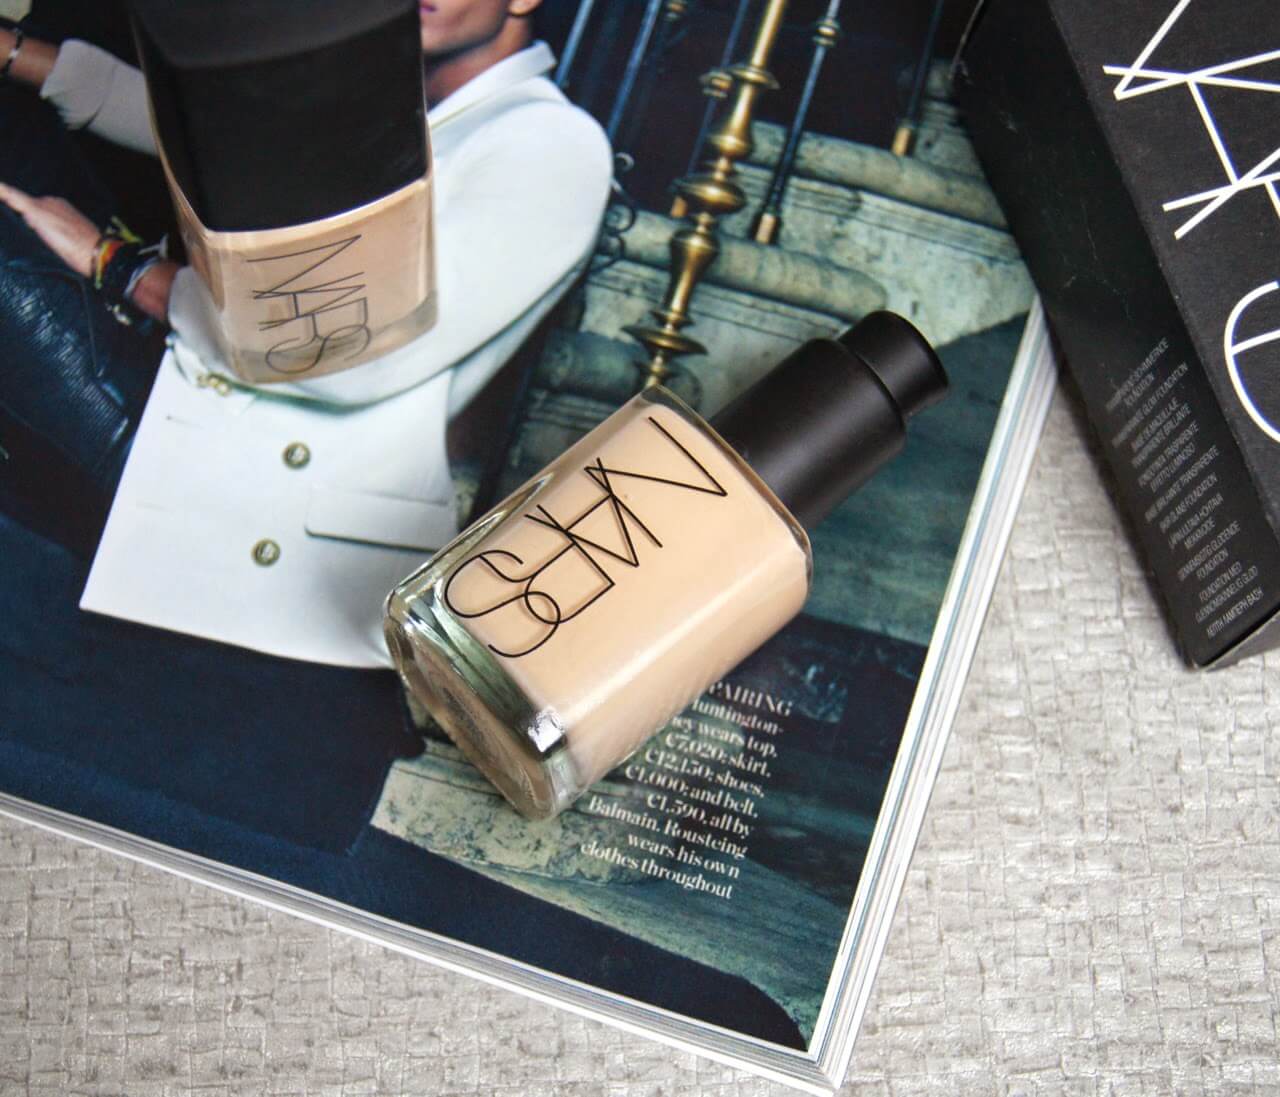 nars-sheer-glow-foundation-review (1)